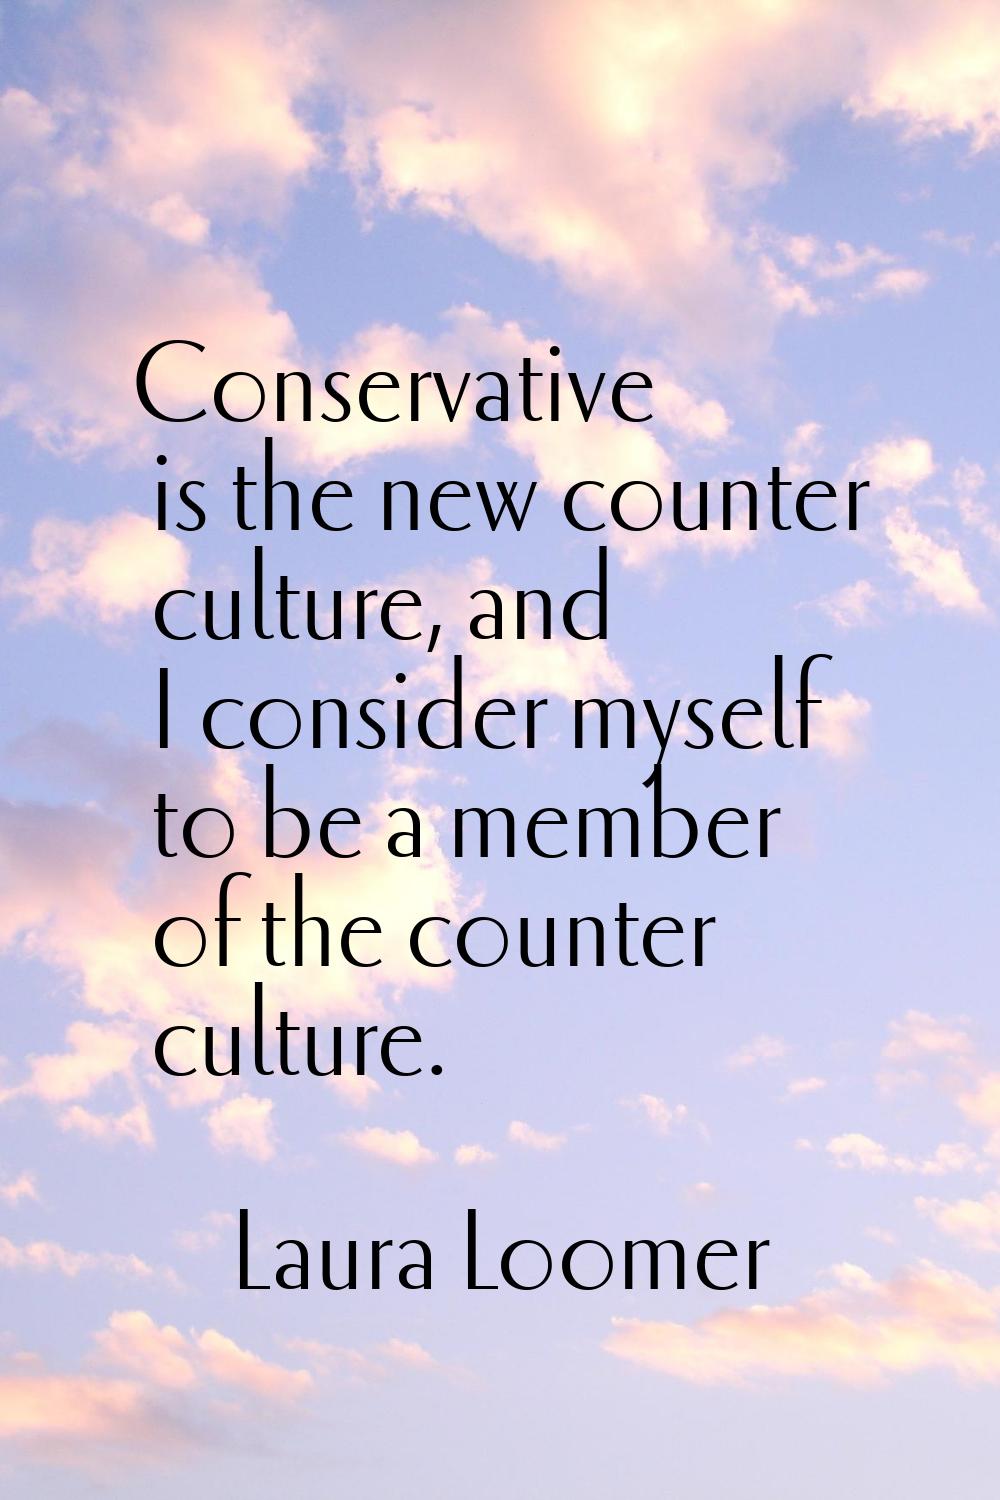 Conservative is the new counter culture, and I consider myself to be a member of the counter cultur